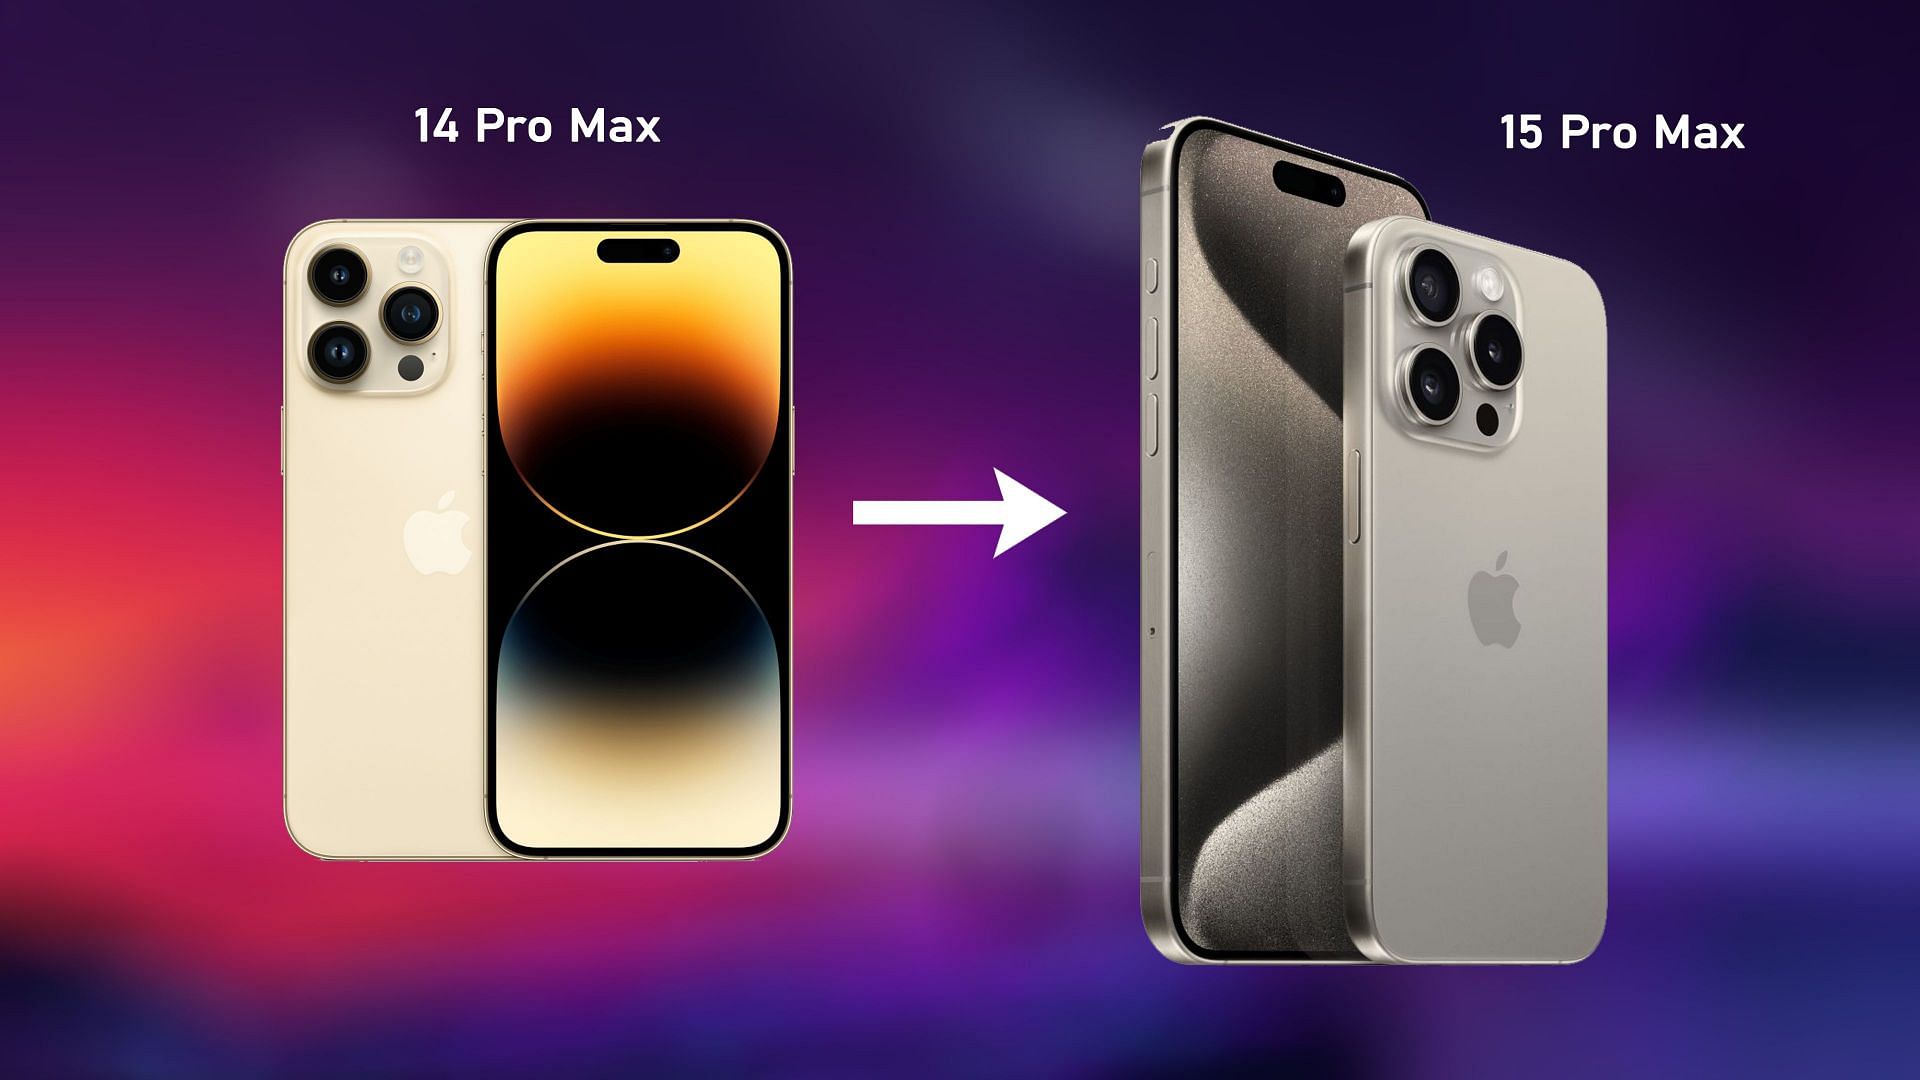 What's The Difference Between The iPhone 15 Pro Max And iPhone 14 Pro Max?